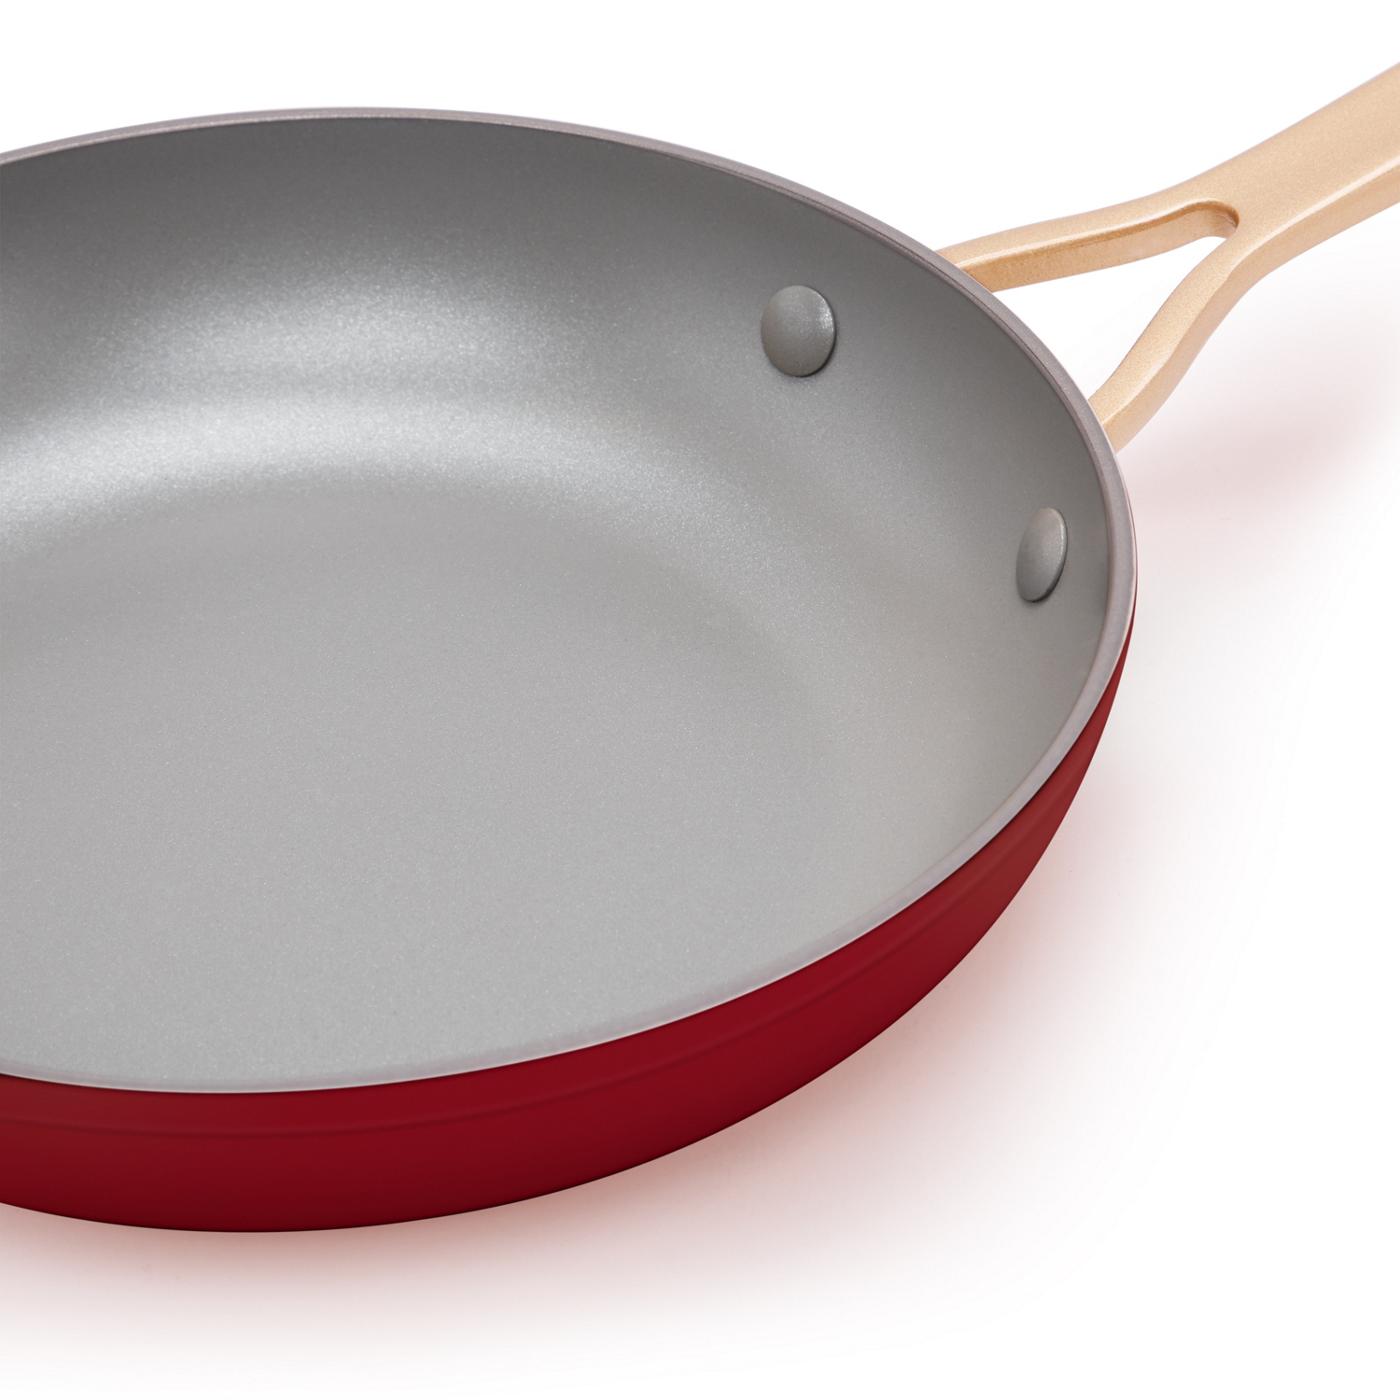 Kitchen & Table by H-E-B Non-Stick Fry Pan - Bordeaux Red; image 5 of 6